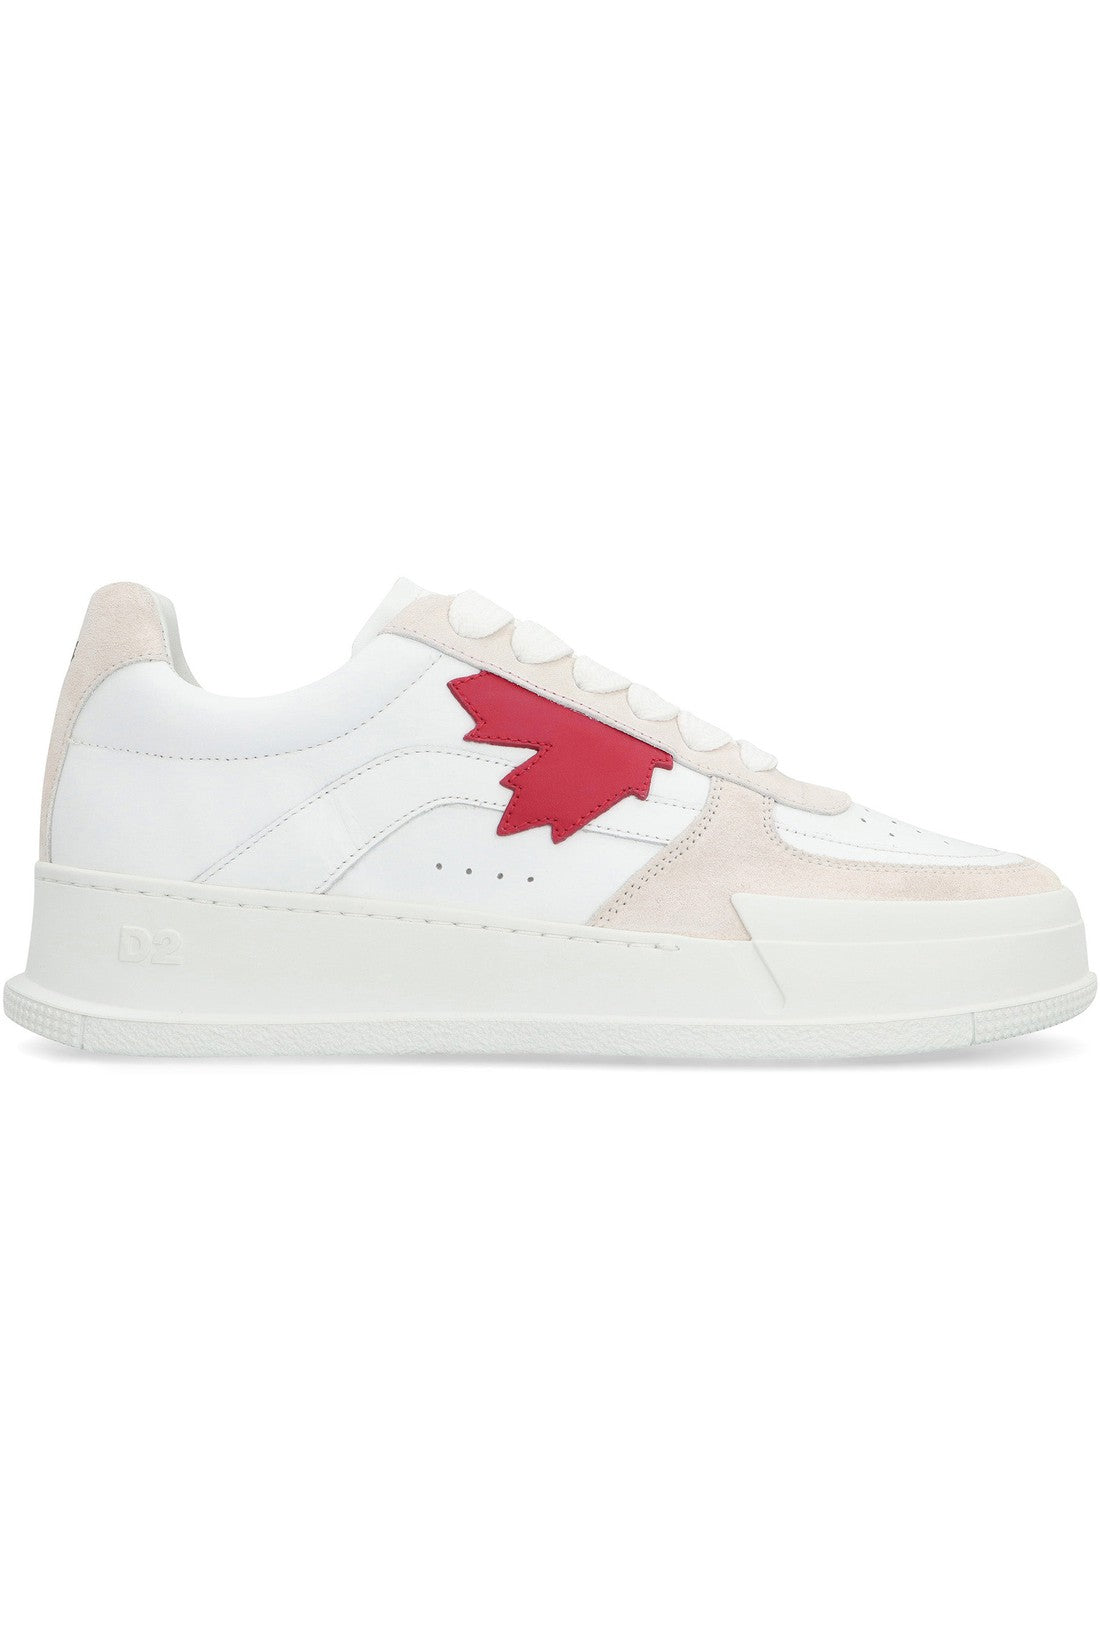 Dsquared2-OUTLET-SALE-Canadian leather low-top sneakers-ARCHIVIST